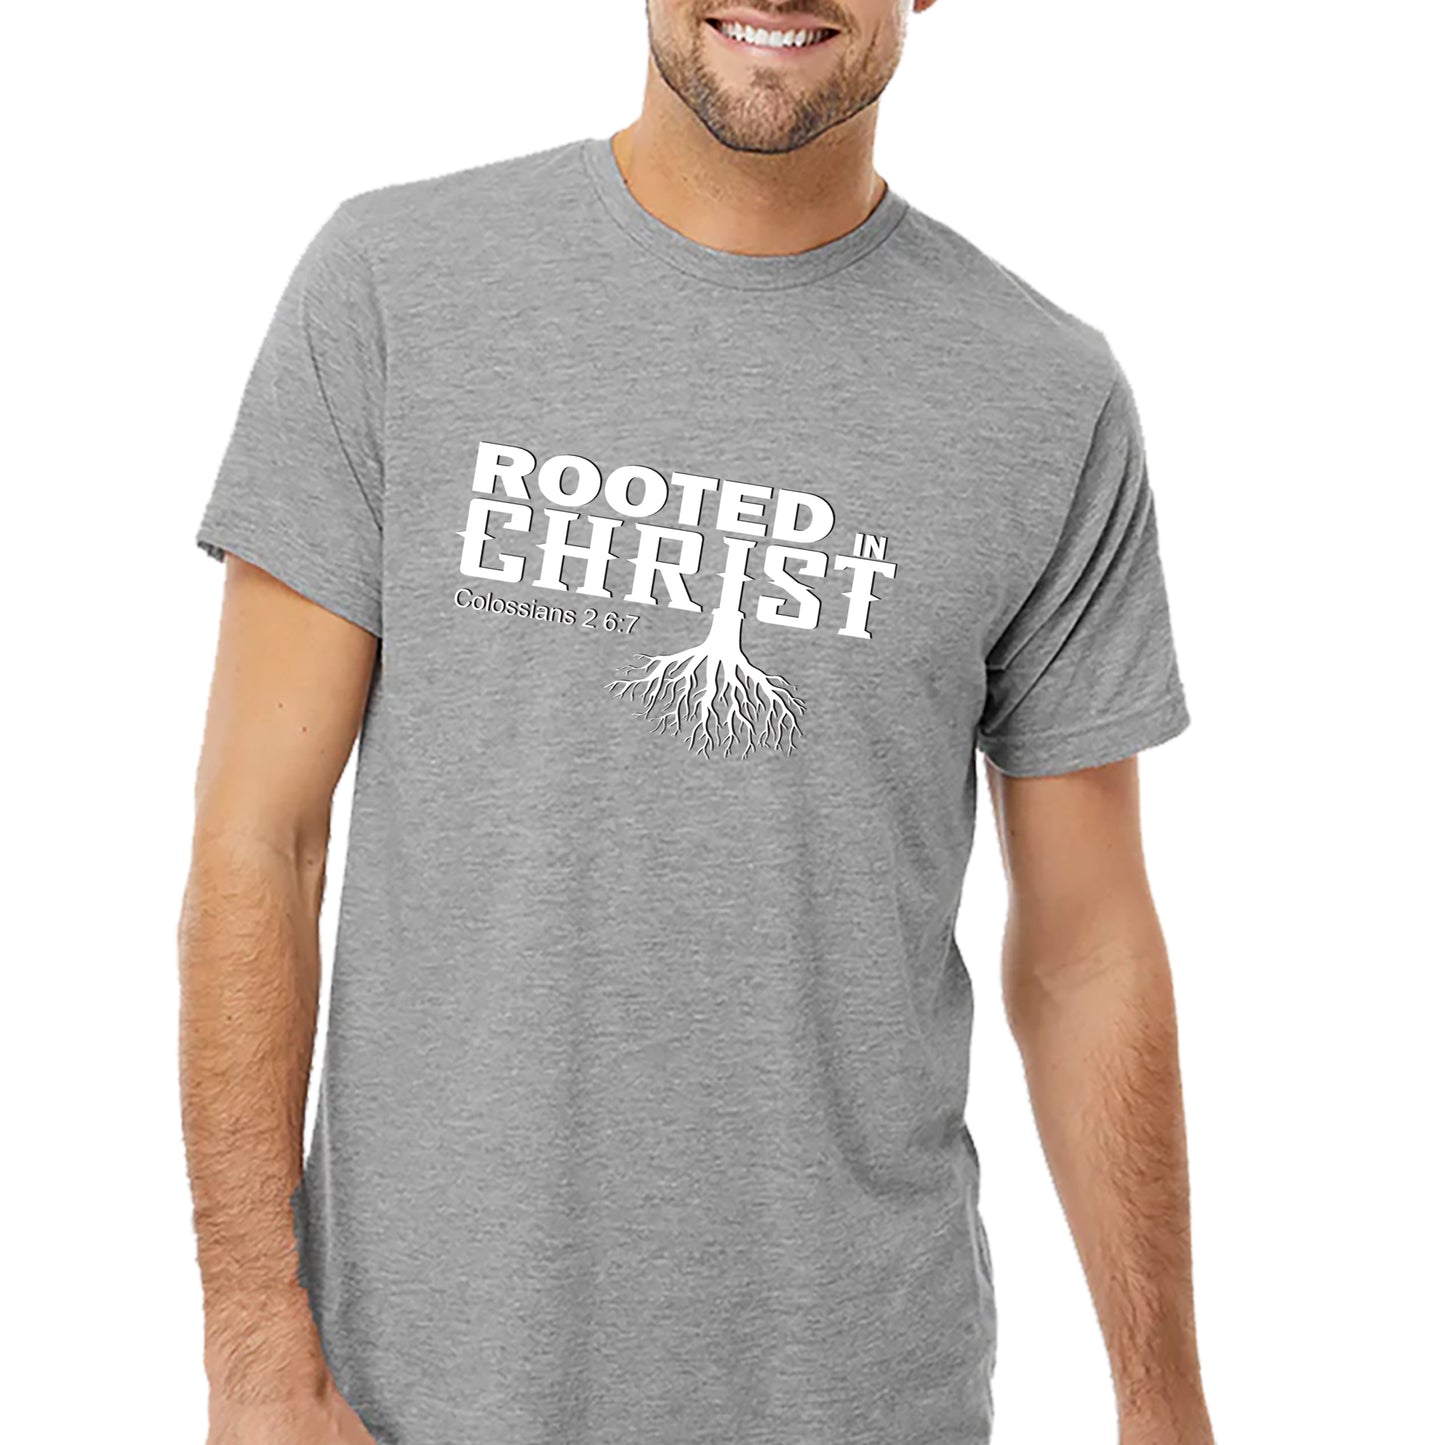 Rooted In Christ T-shirt